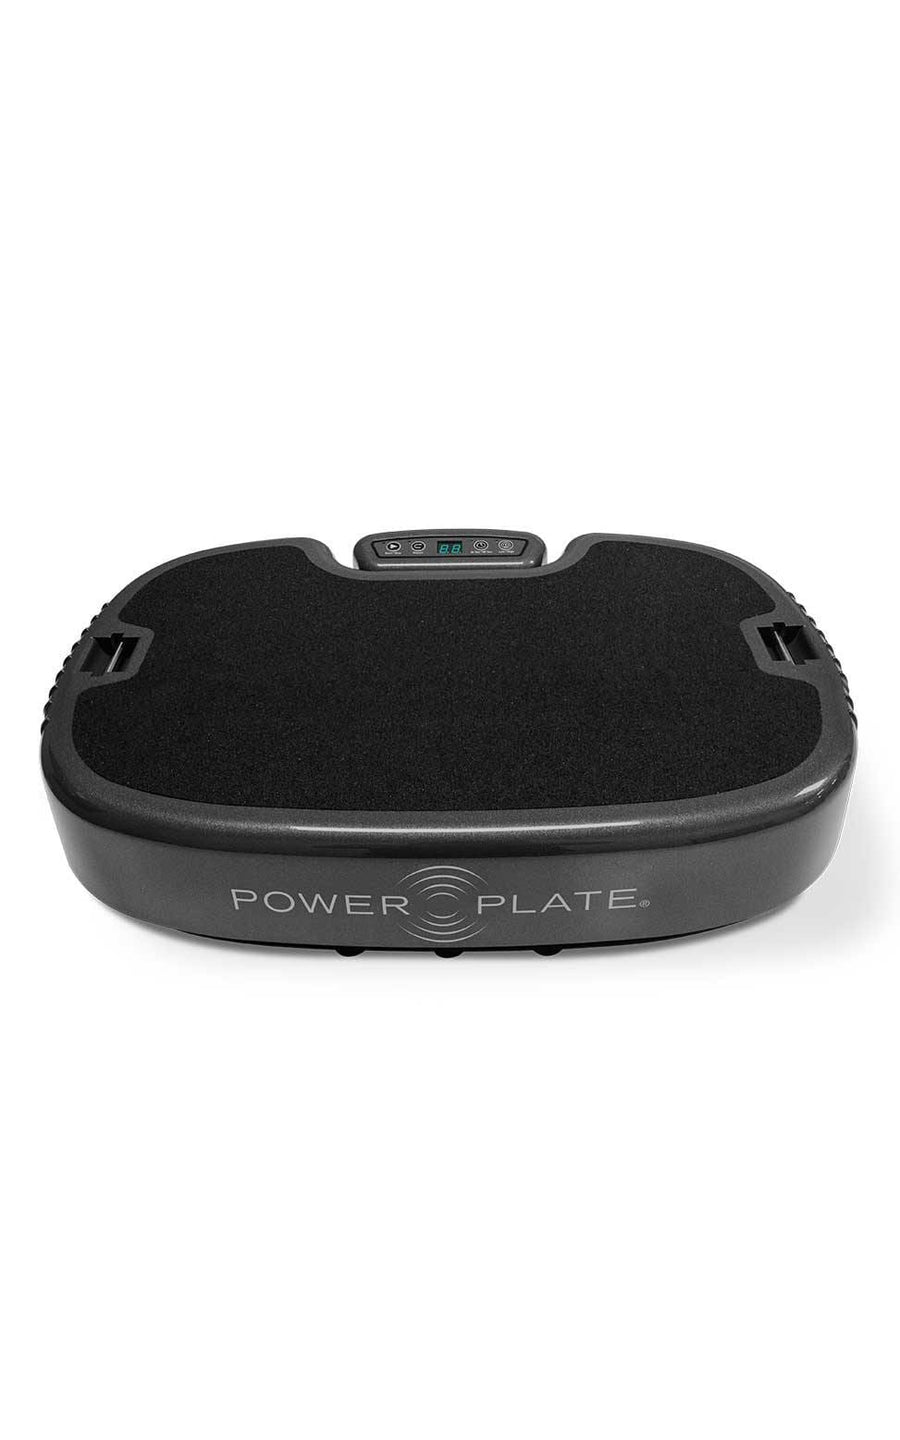 Personal Power Plate Vibration Therapy - My Spa Shop